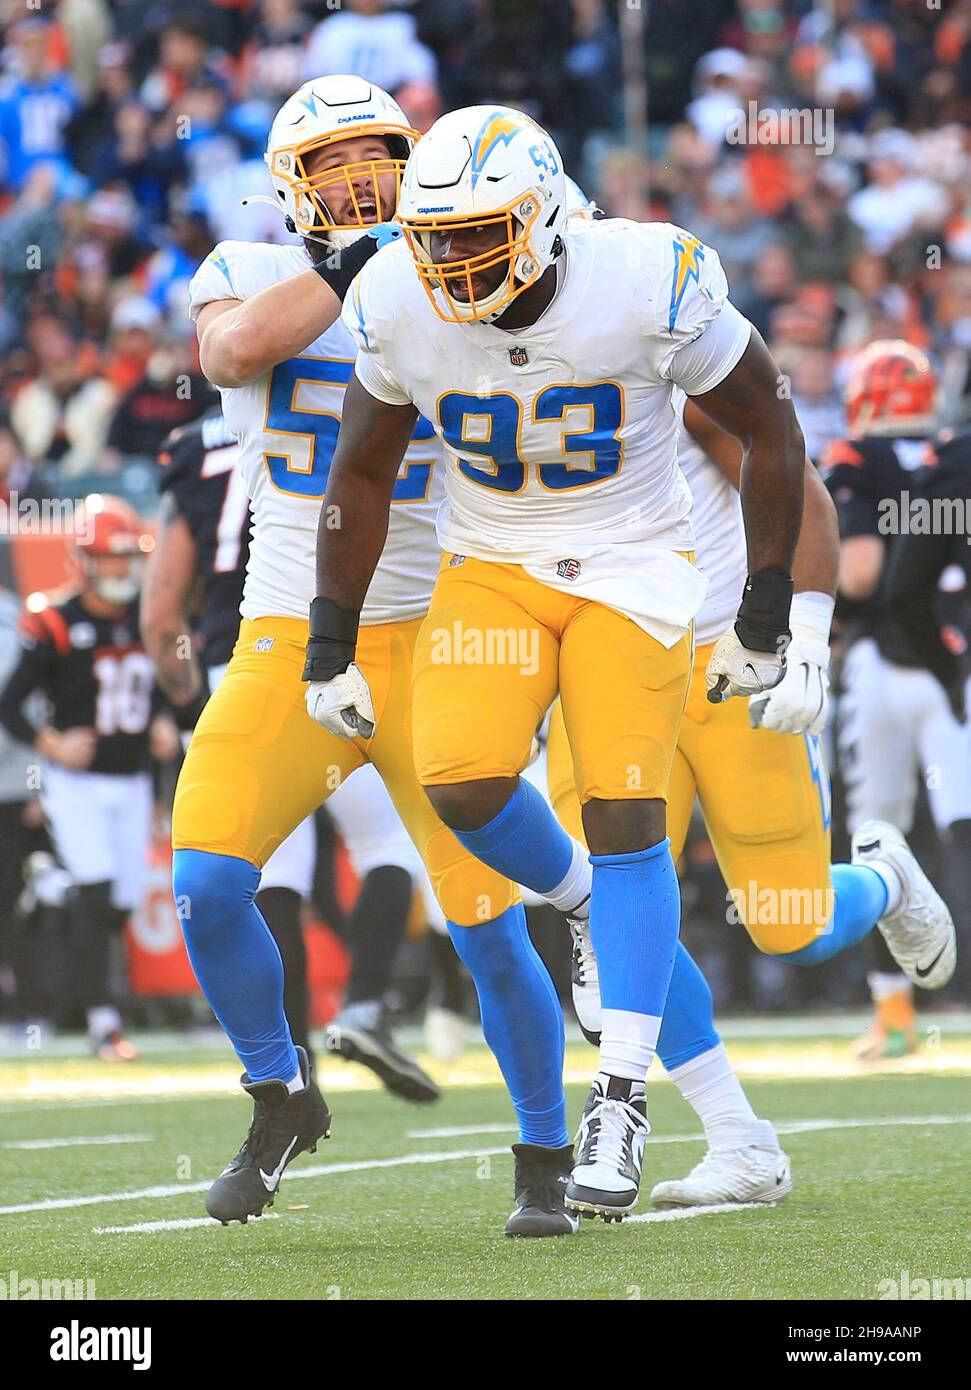 Cincinnati, Ohio, USA. 5th Dec, 2021. Los Angeles Chargers defensive tackle Justin Jones (93) is congratulated by defensive teammate inside linebacker Kyler Fackrell (52) at the NFL football game between the Los Angeles Chargers and the Cincinnati Bengals at Paul Brown Stadium in Cincinnati, Ohio. JP Waldron/Cal Sport Media/Alamy Live News Stock Photo